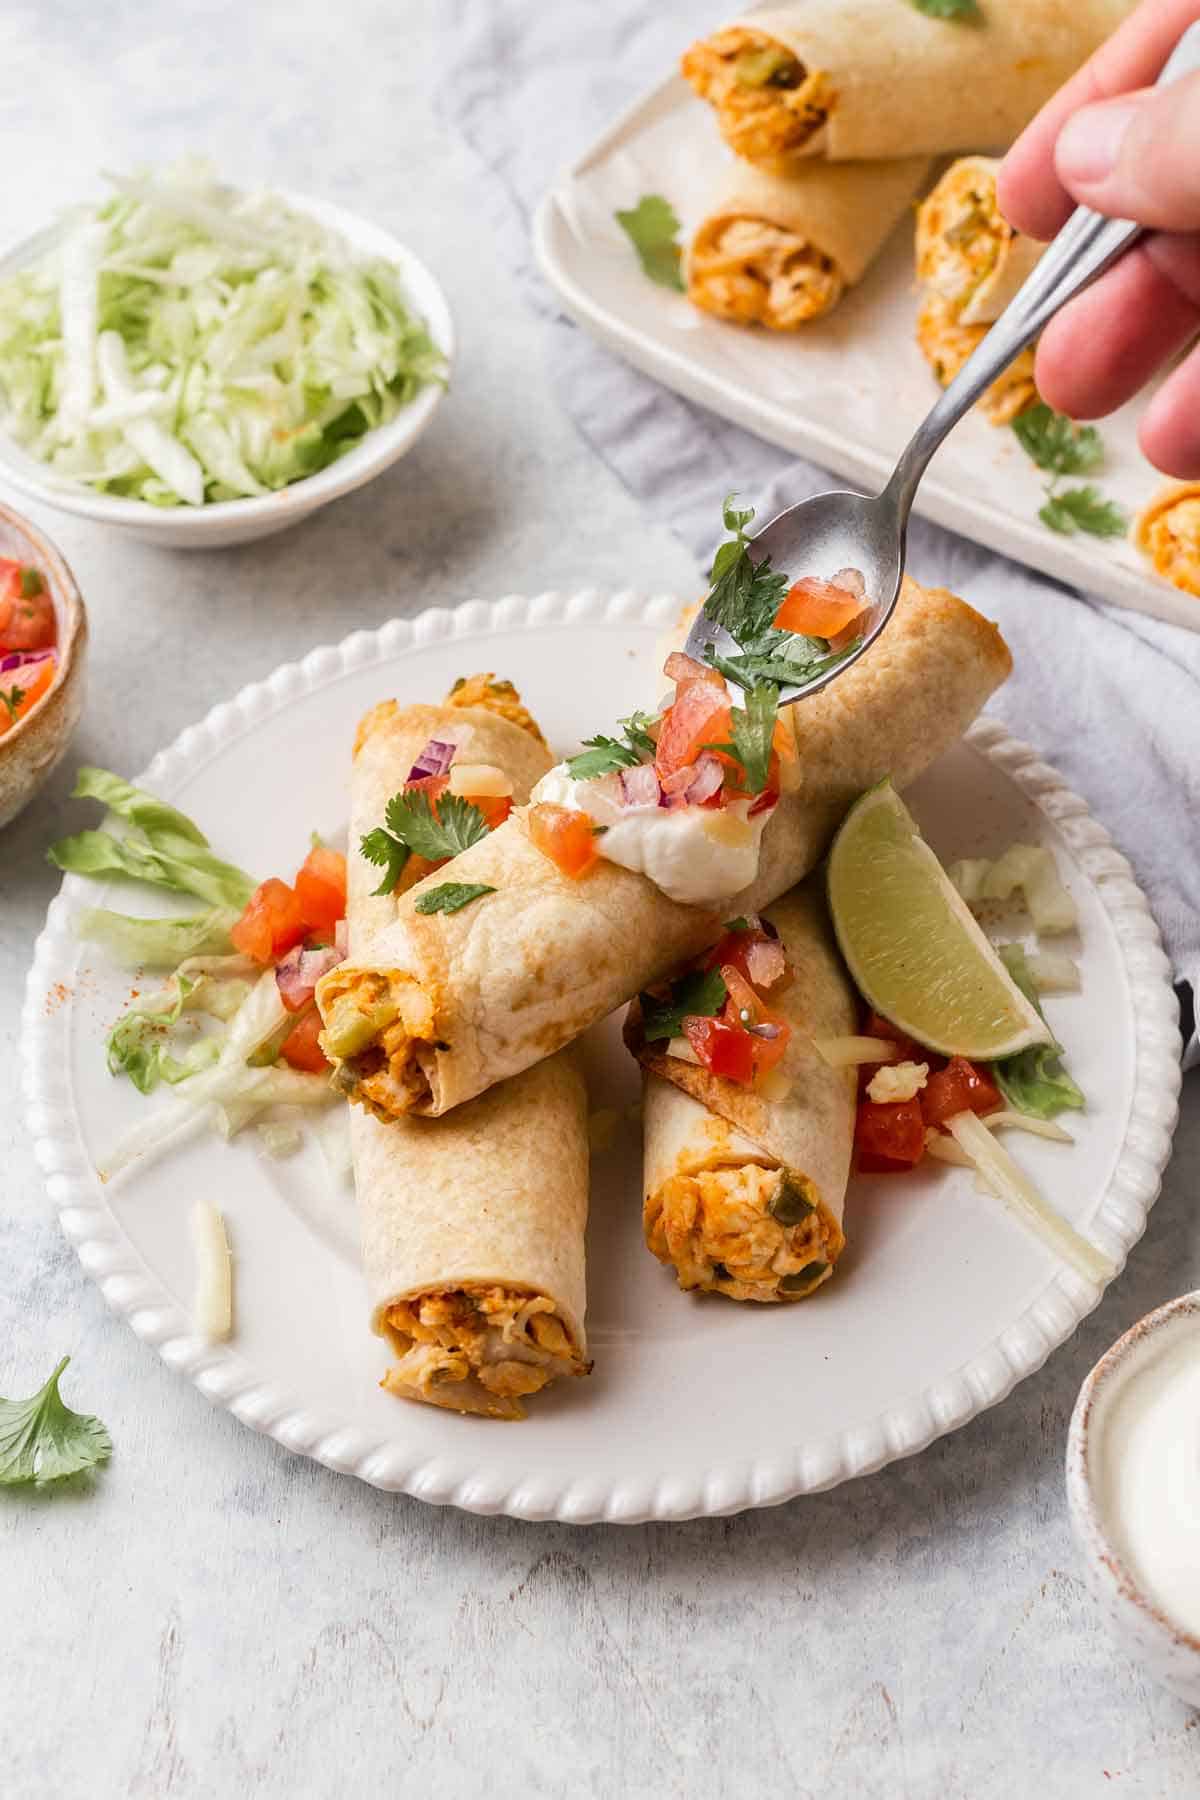 Baked Mexican Chicken Taquitos made with Cream Cheese